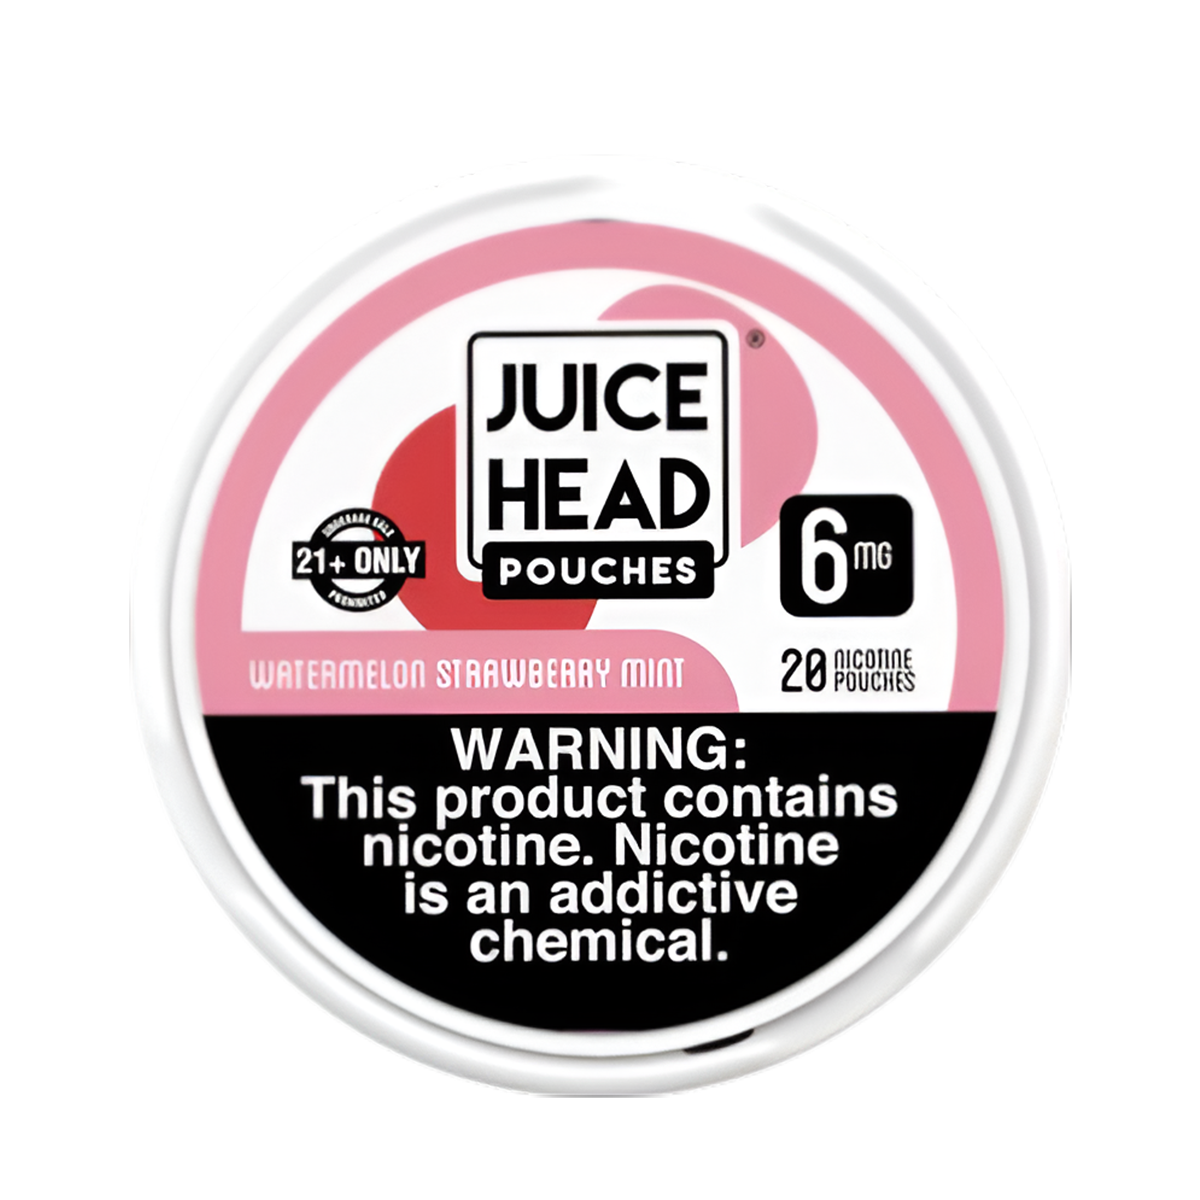 Juice Head Nicotine Pouches 6 Mg 20 Nicotine Punches Watermelon Strawberry Mint